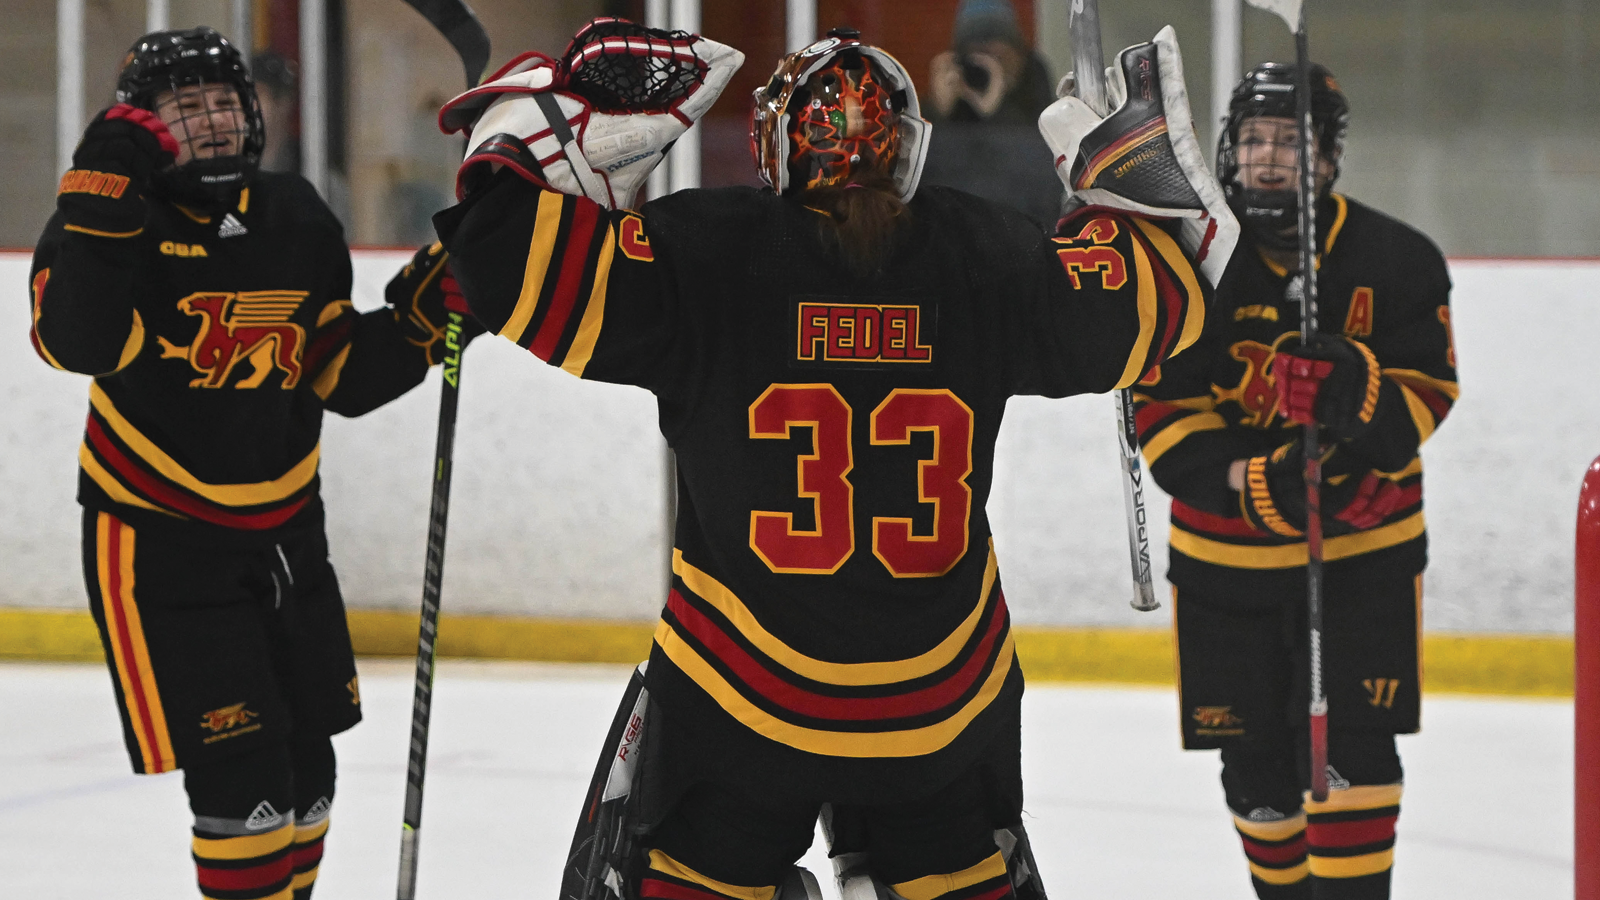 Guelph women's hockey goalie Martina Fedel celebrating on the ice with two of her teammates after a win